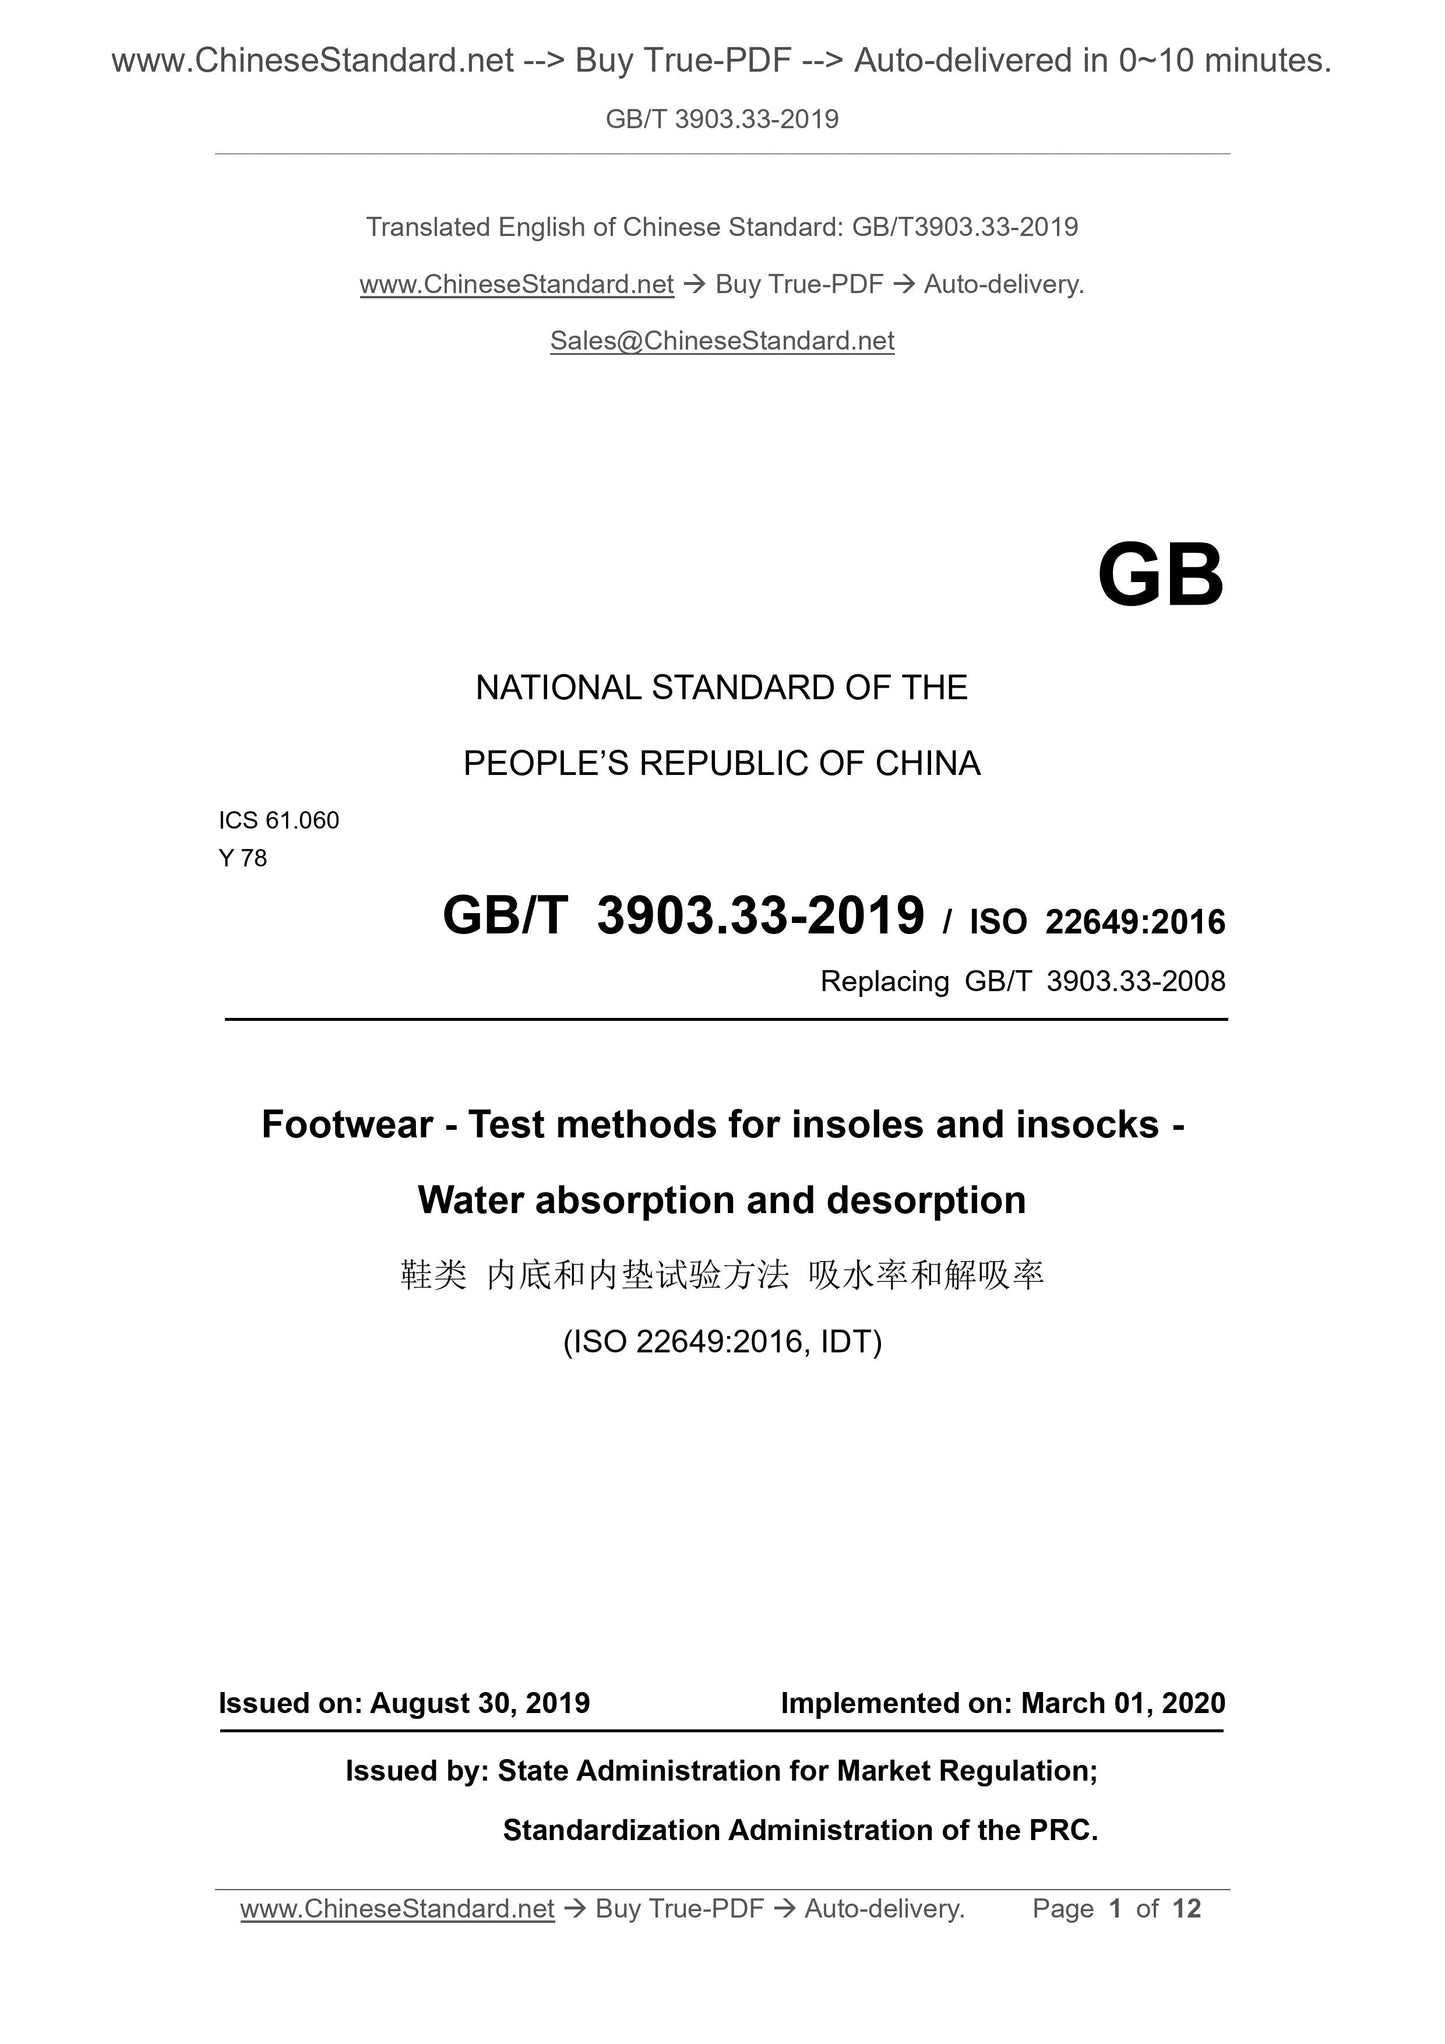 GB/T 3903.33-2019 Page 1